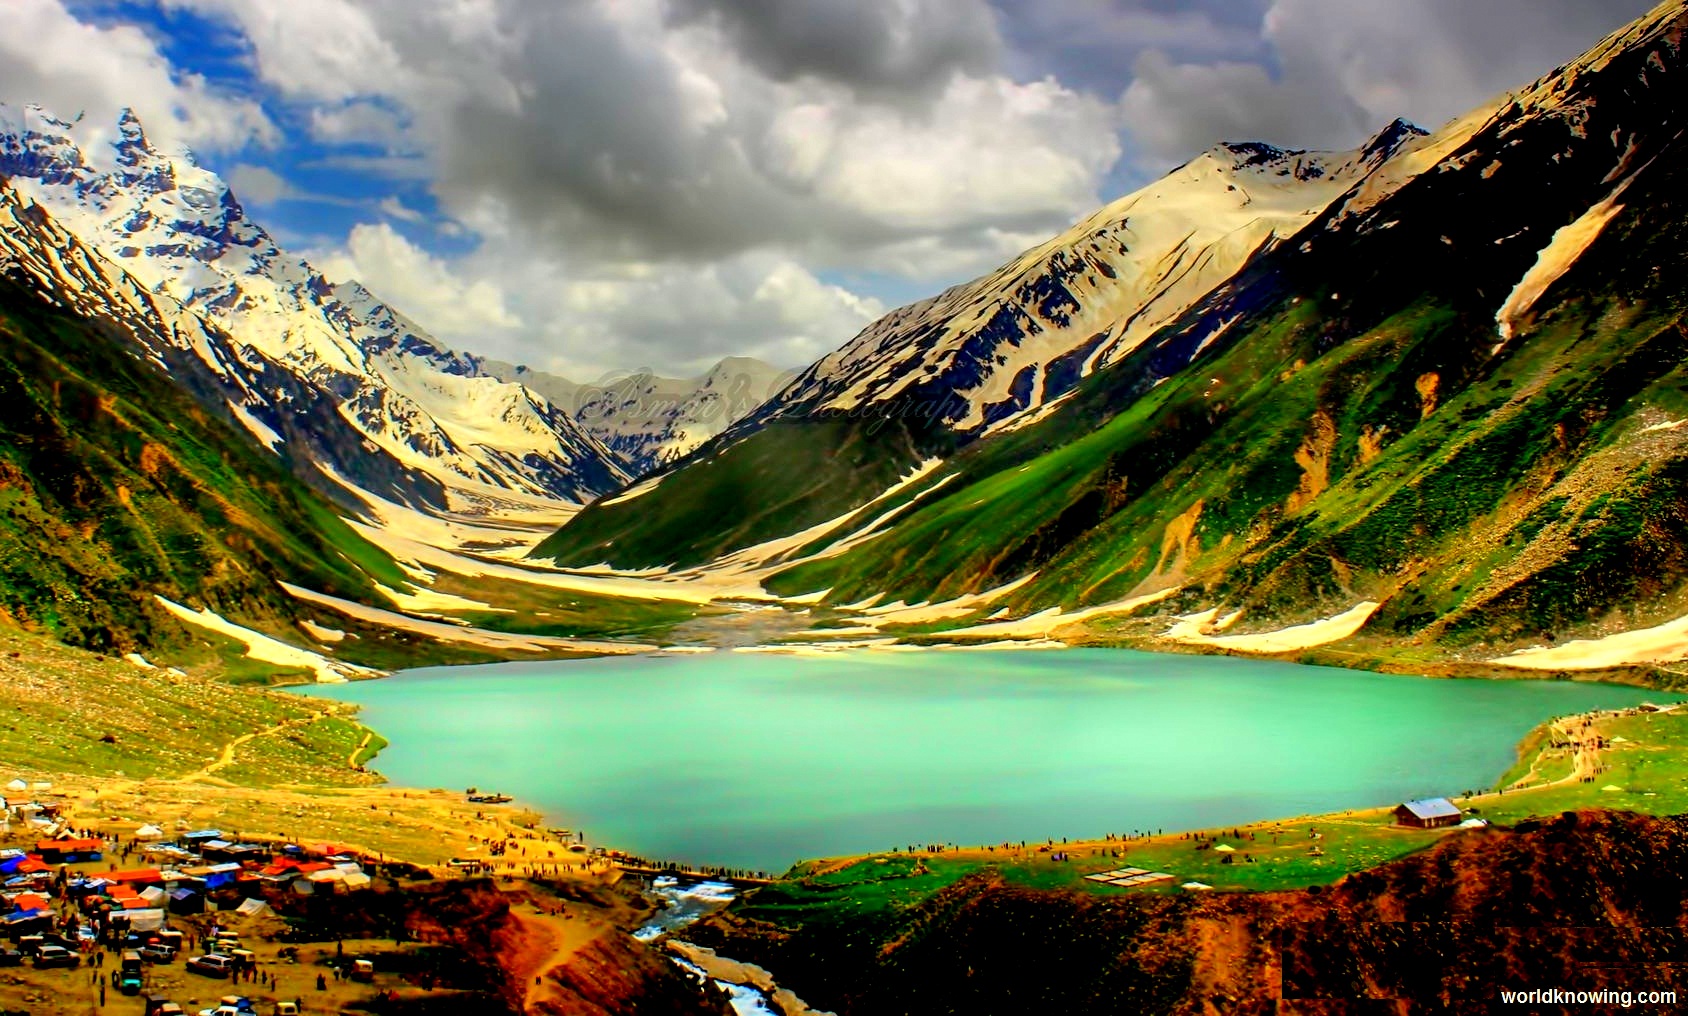 The unshowed Natural Beauty of Pakistan. Steemit